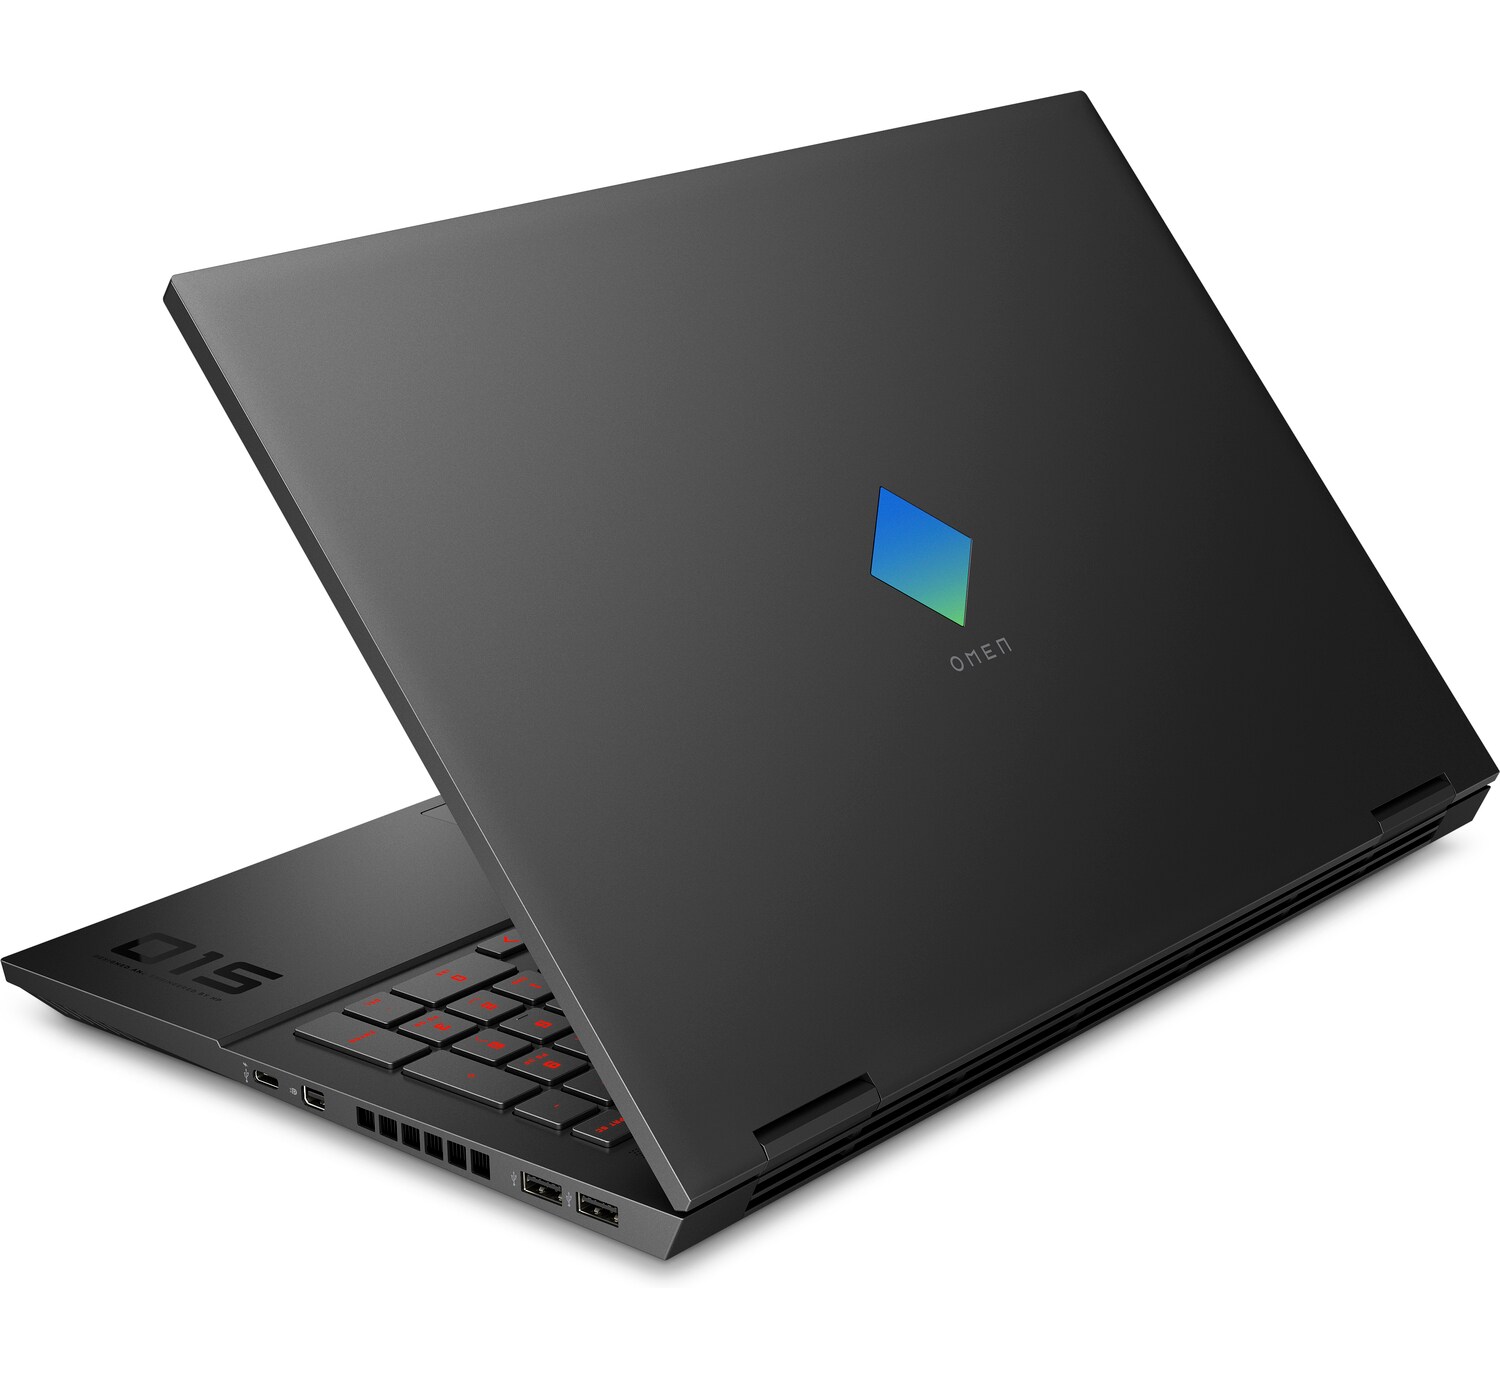 HP Omen 15 laptop now powered by 10th Gen Intel® Core™ processor for